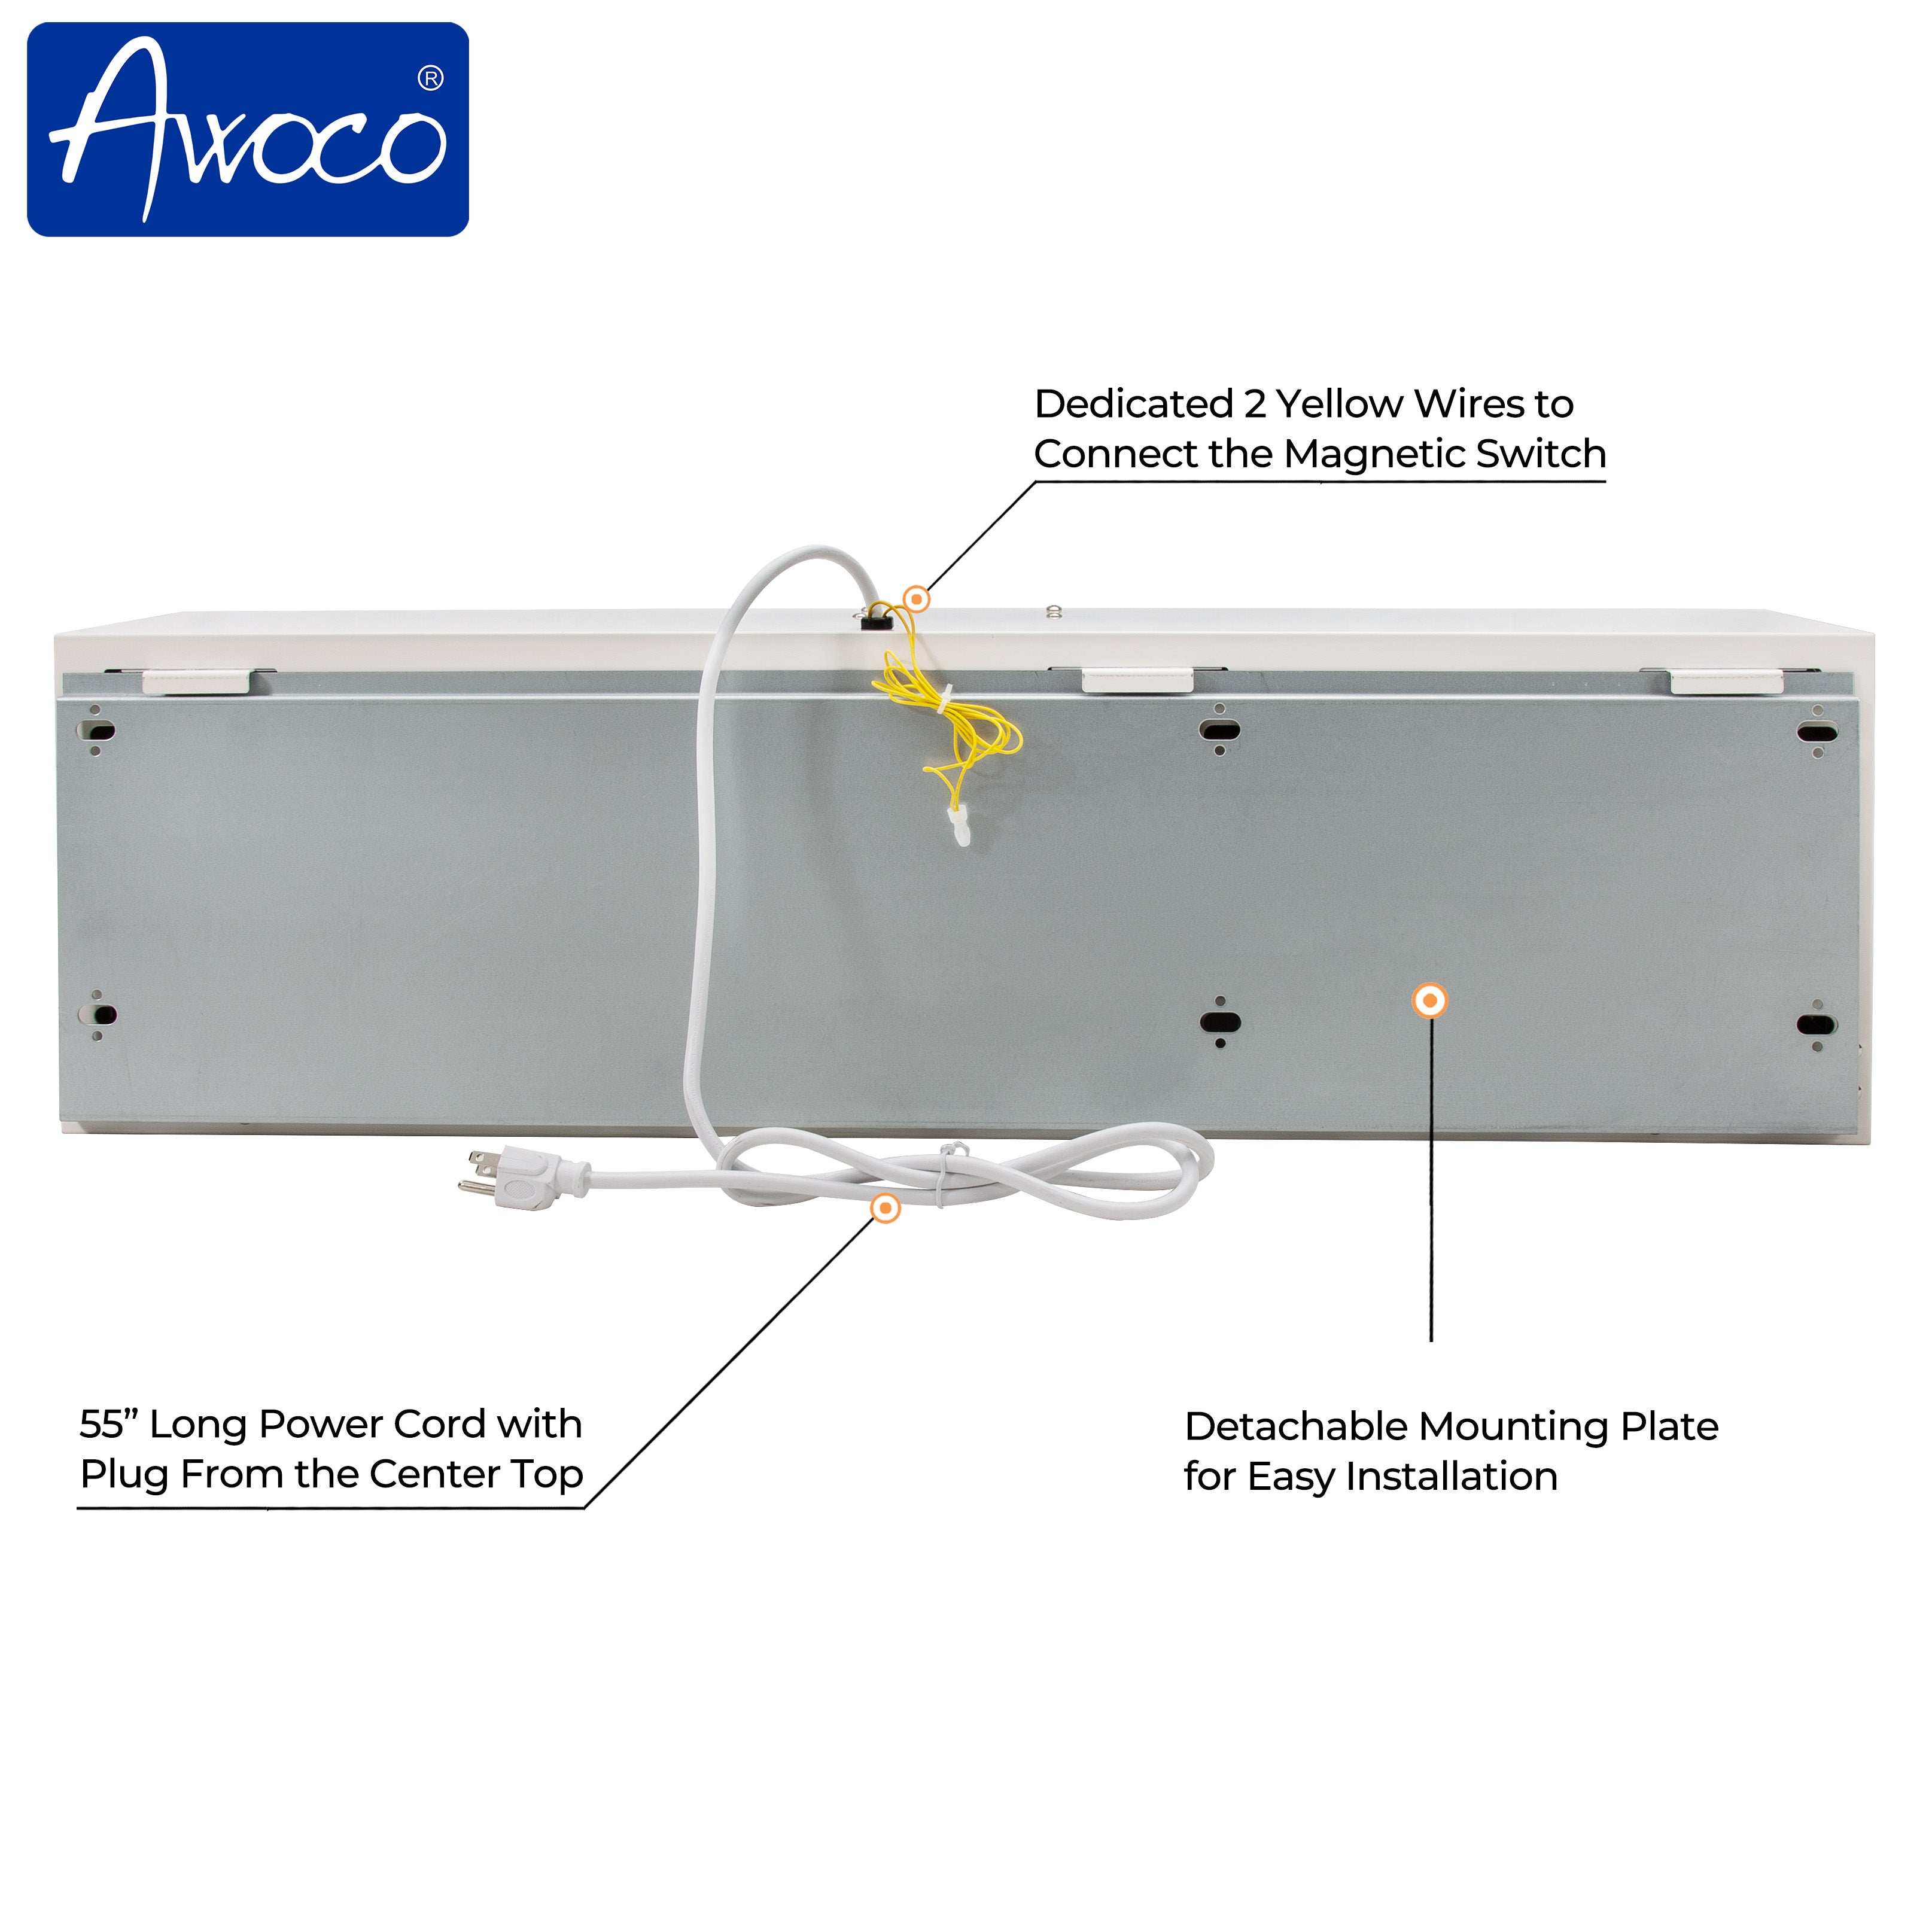 Awoco 60" Super Power 1 Speed 2400 CFM Commercial Indoor Air Curtain, 120V Unheated, ETL & UL Certified to Meet NSF 37 Food Service Standard